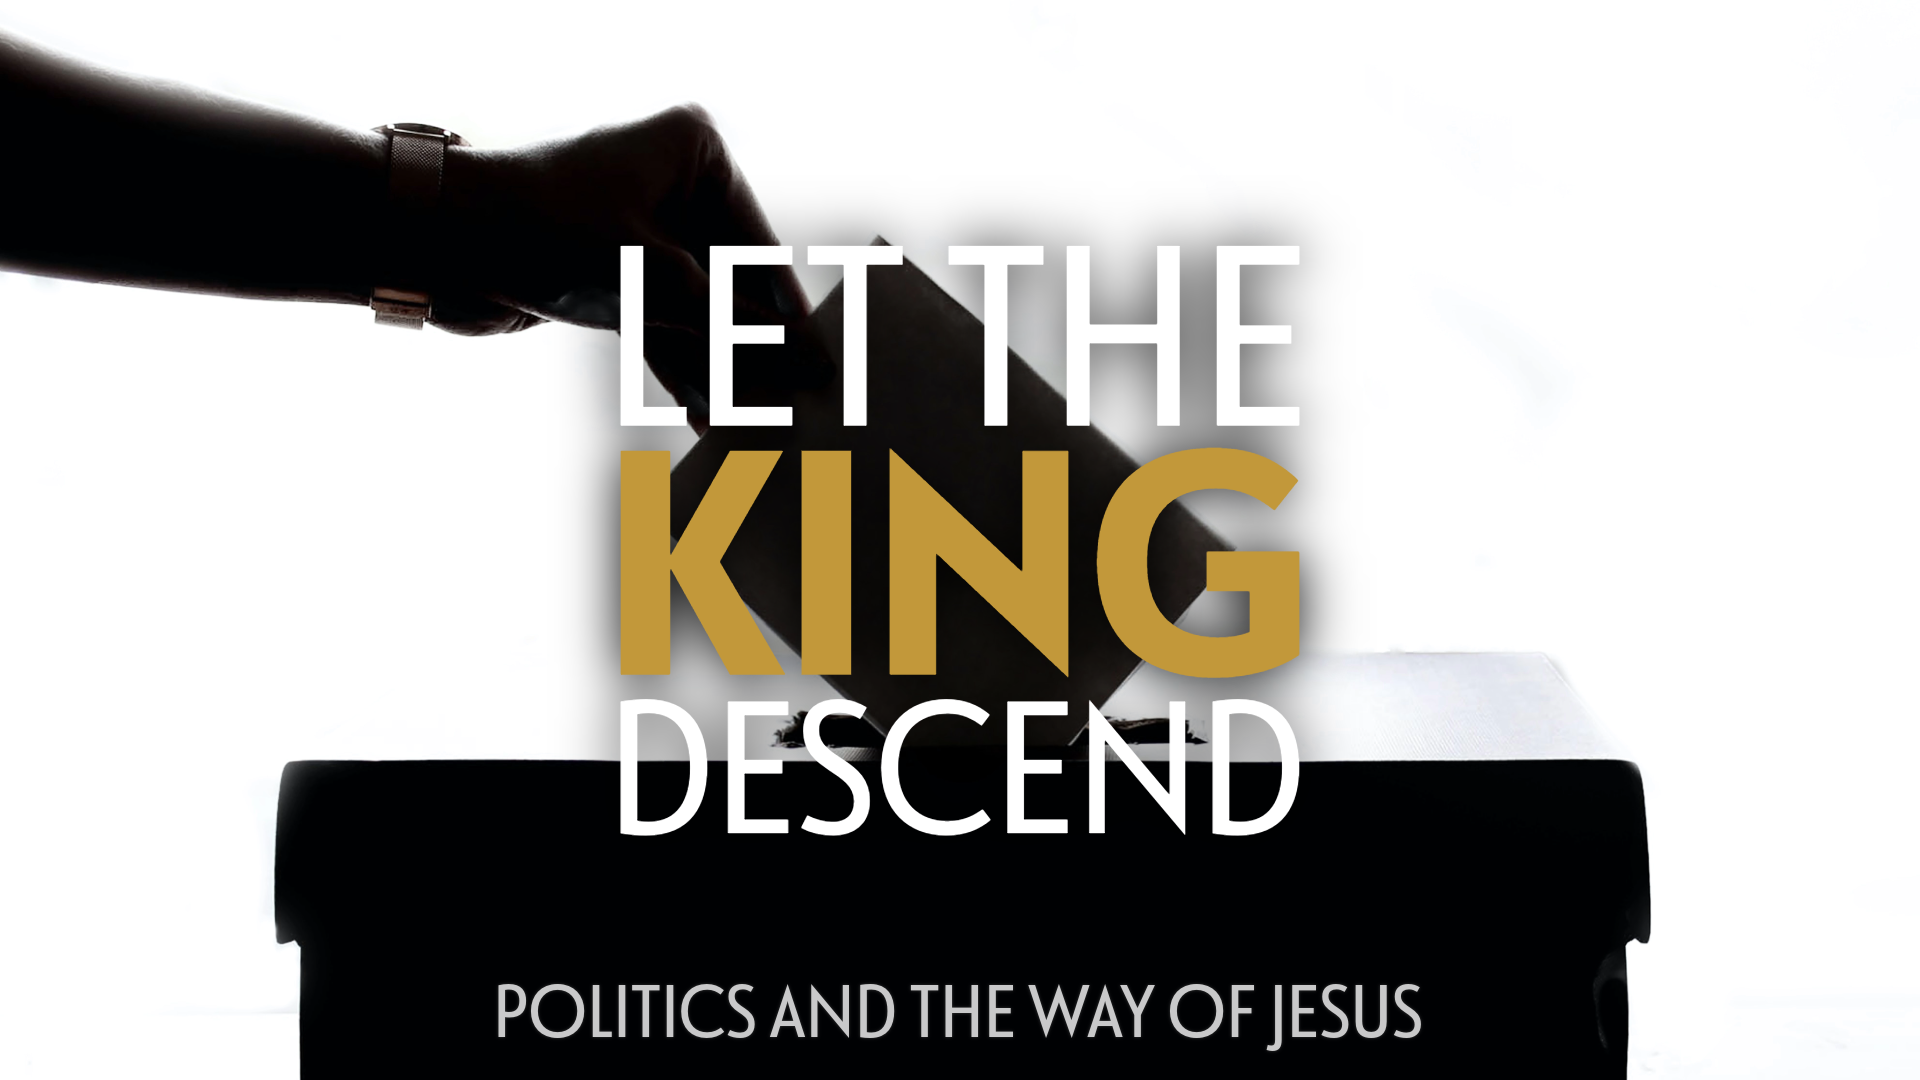 Let The King Descend: Discipleship and Politics